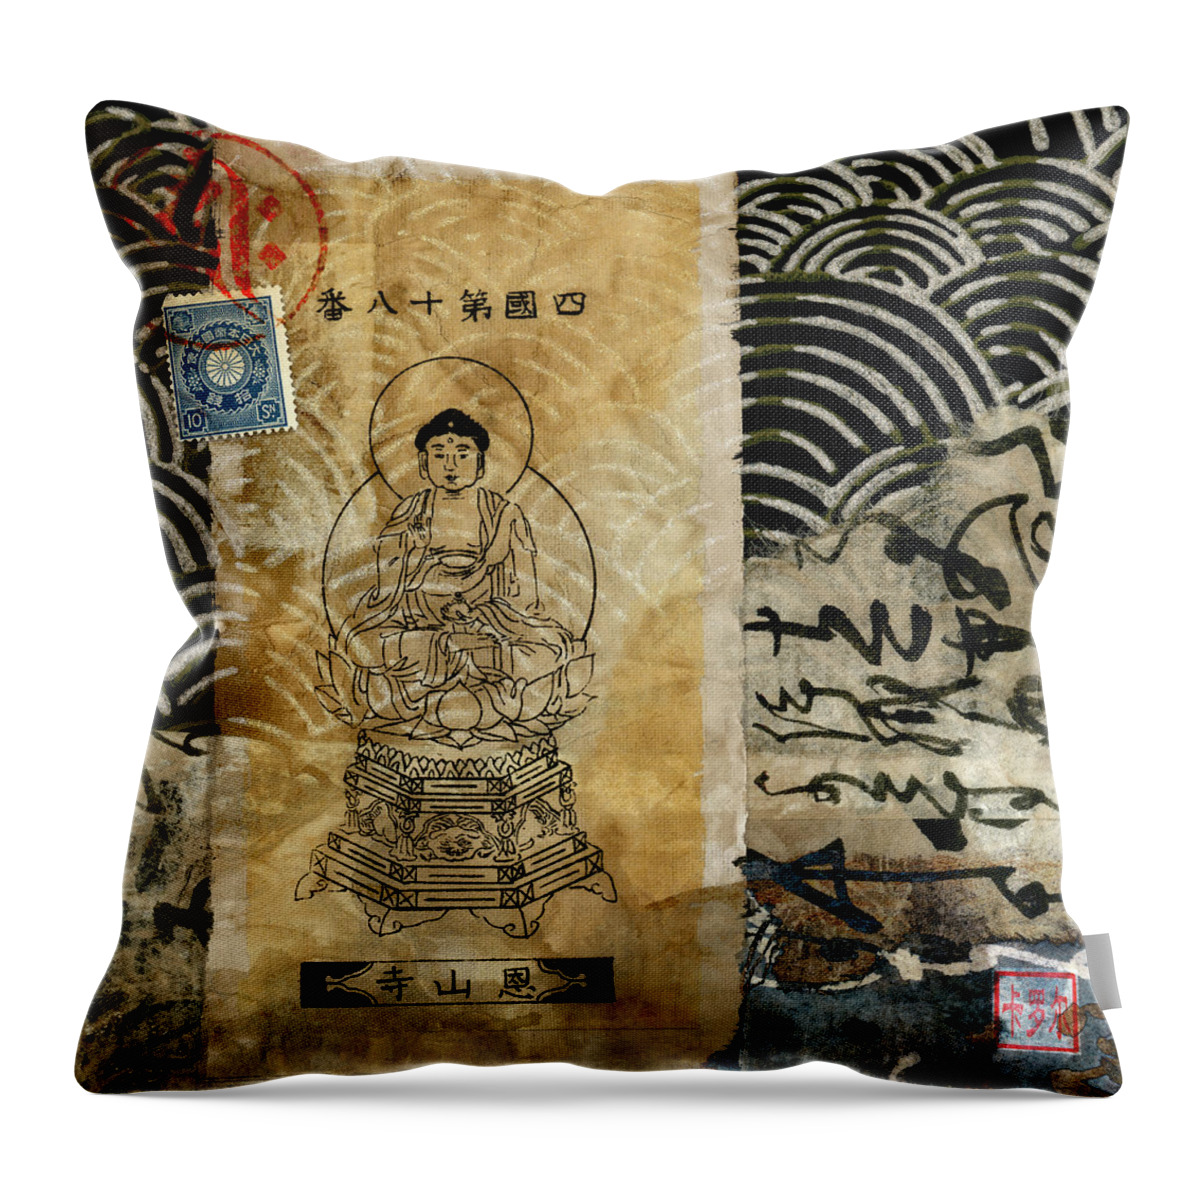 Waves And Mountain Throw Pillow featuring the mixed media Shikoku Waves and Mountain by Carol Leigh